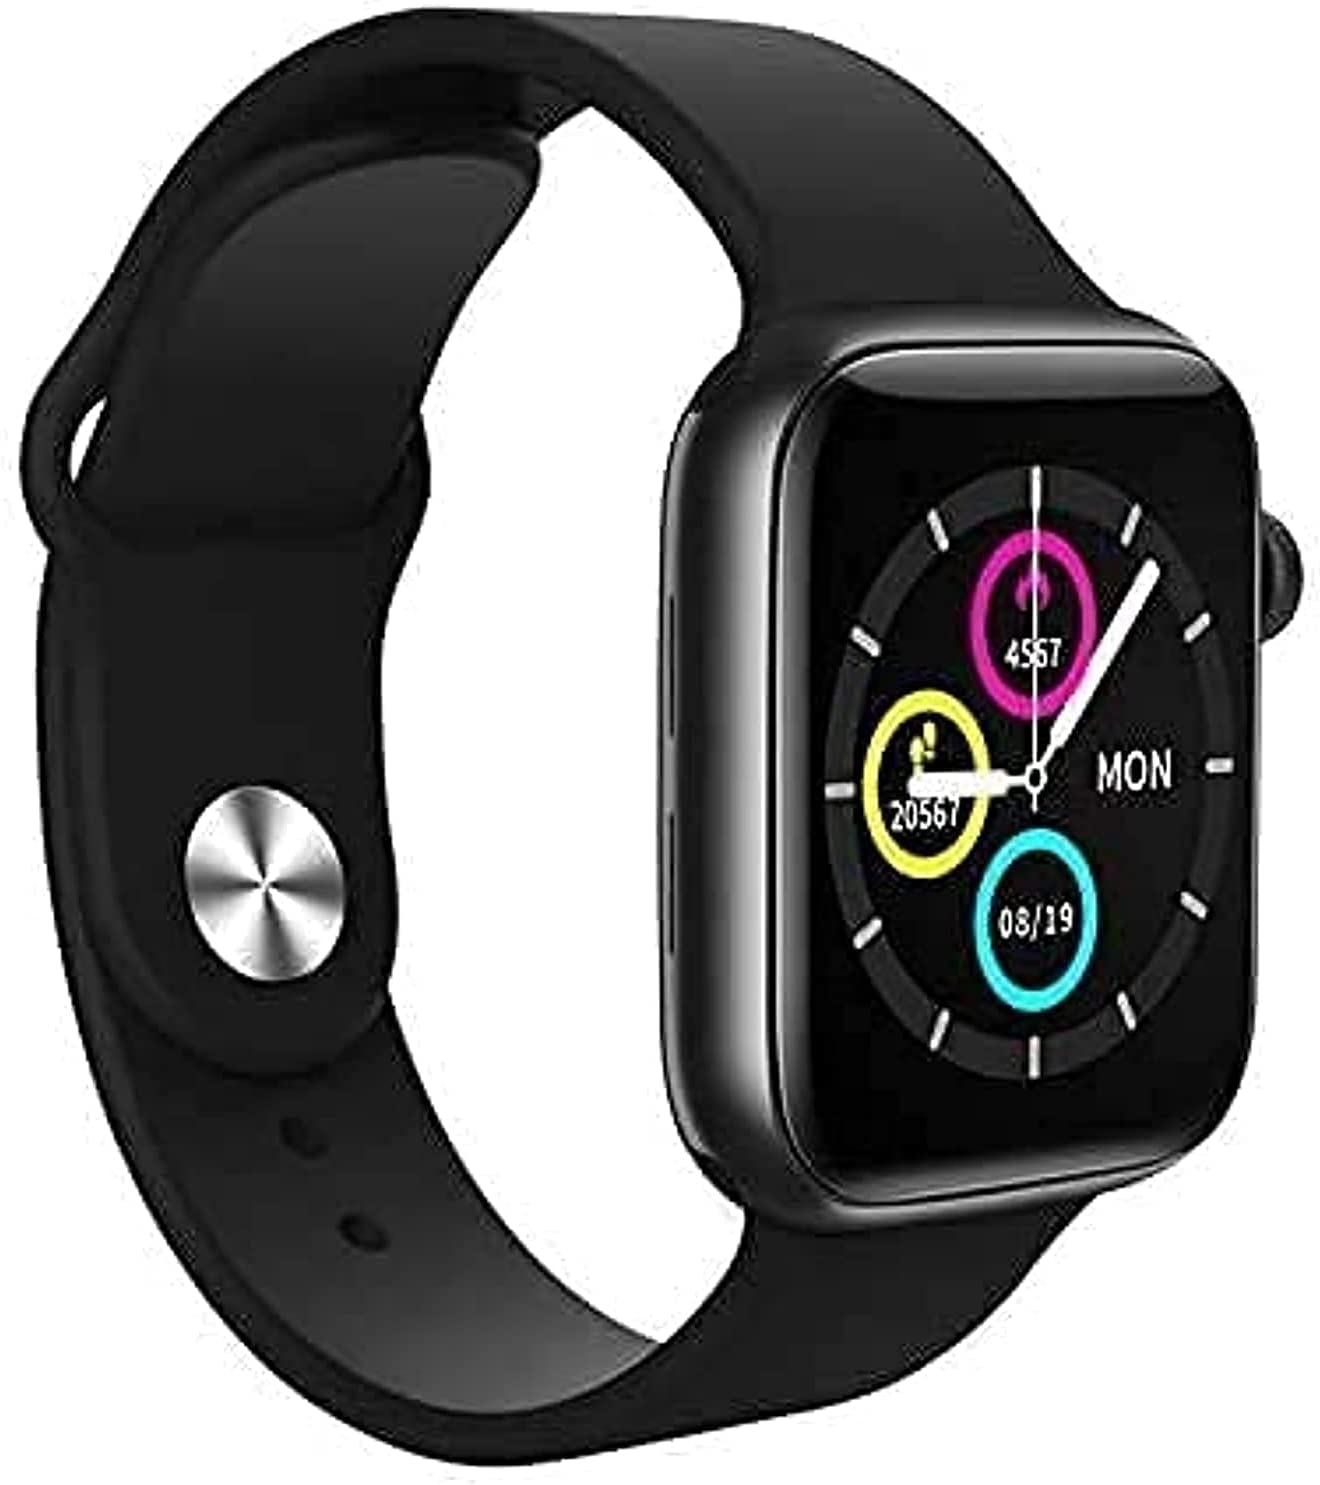 T500 Bluetooth Waterproof Plus and Smart Watch for iPhone iOS Android Phone (Black) TilyExpress Uganda